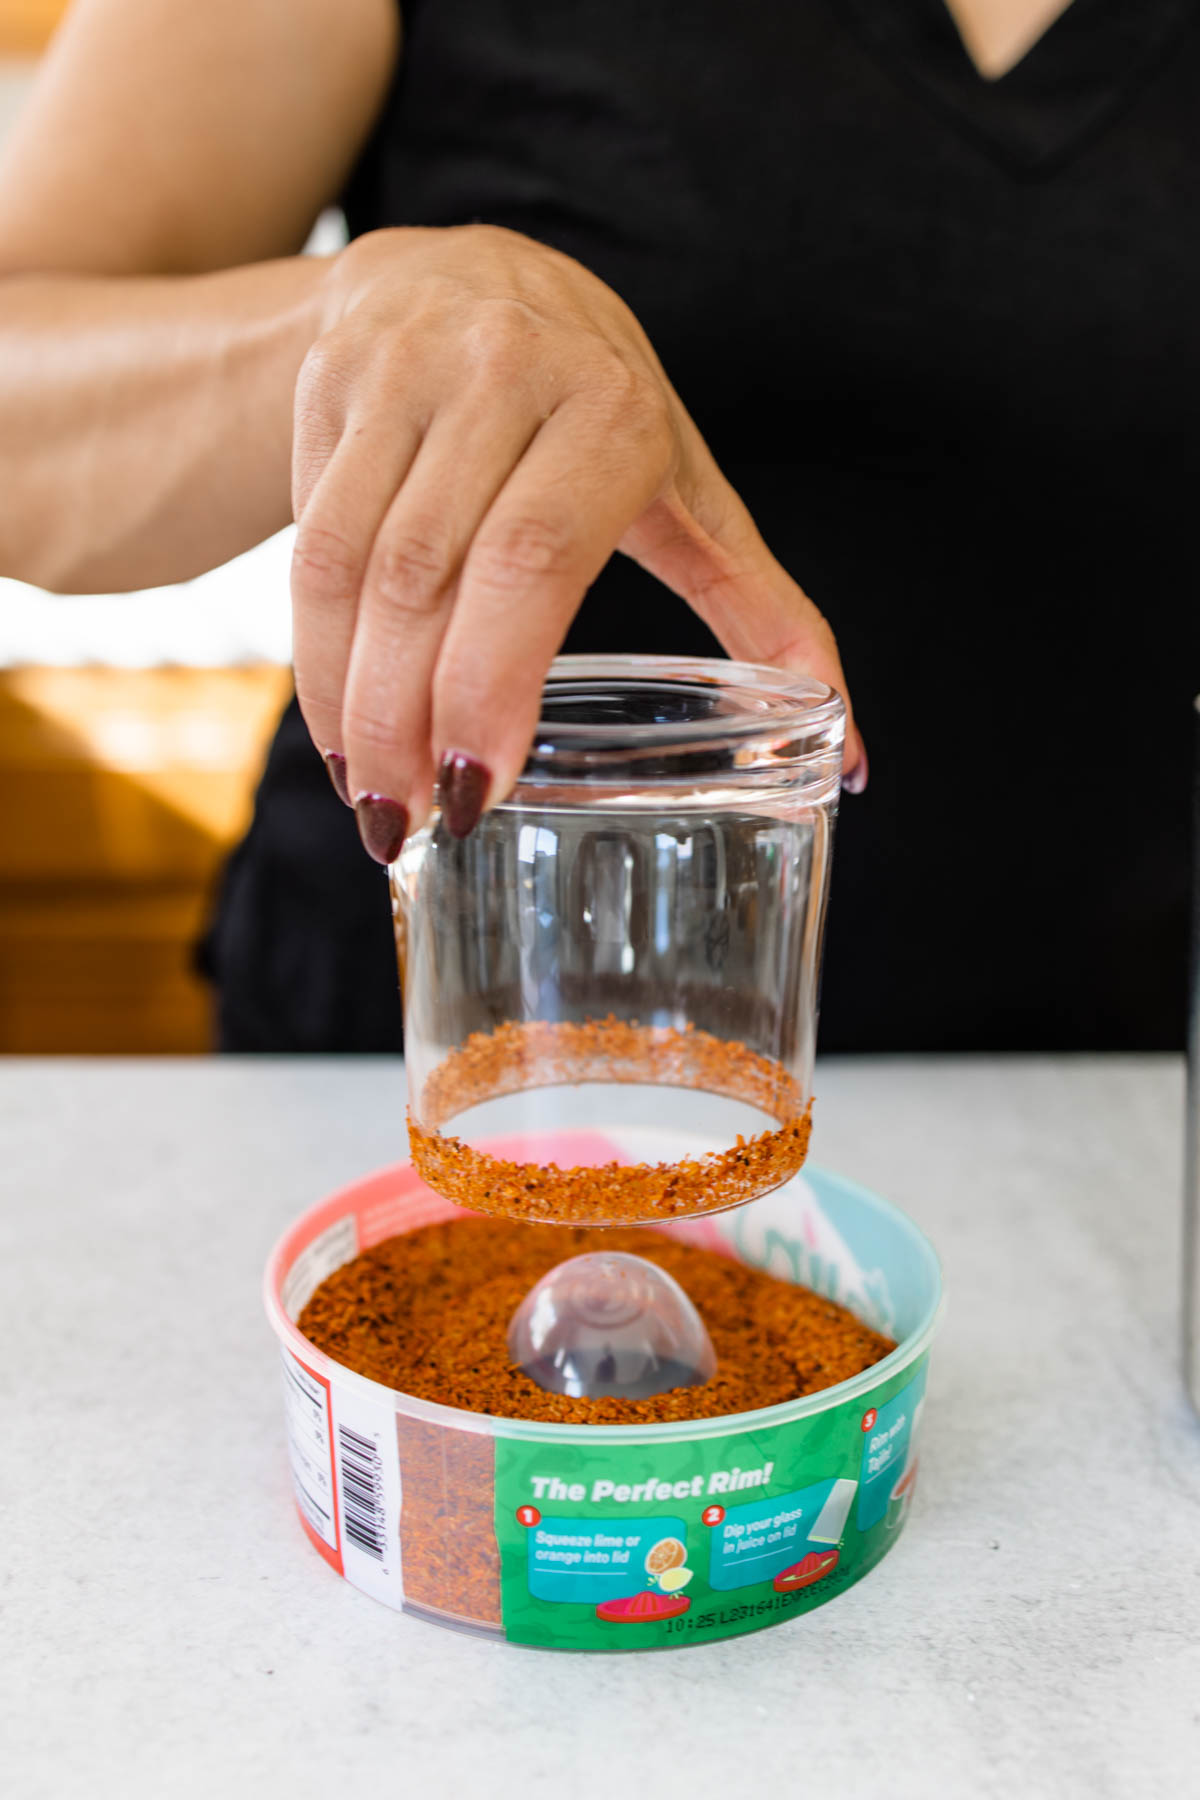 Woman dipping a cocktail glass in a container of Tajin for a margarita.